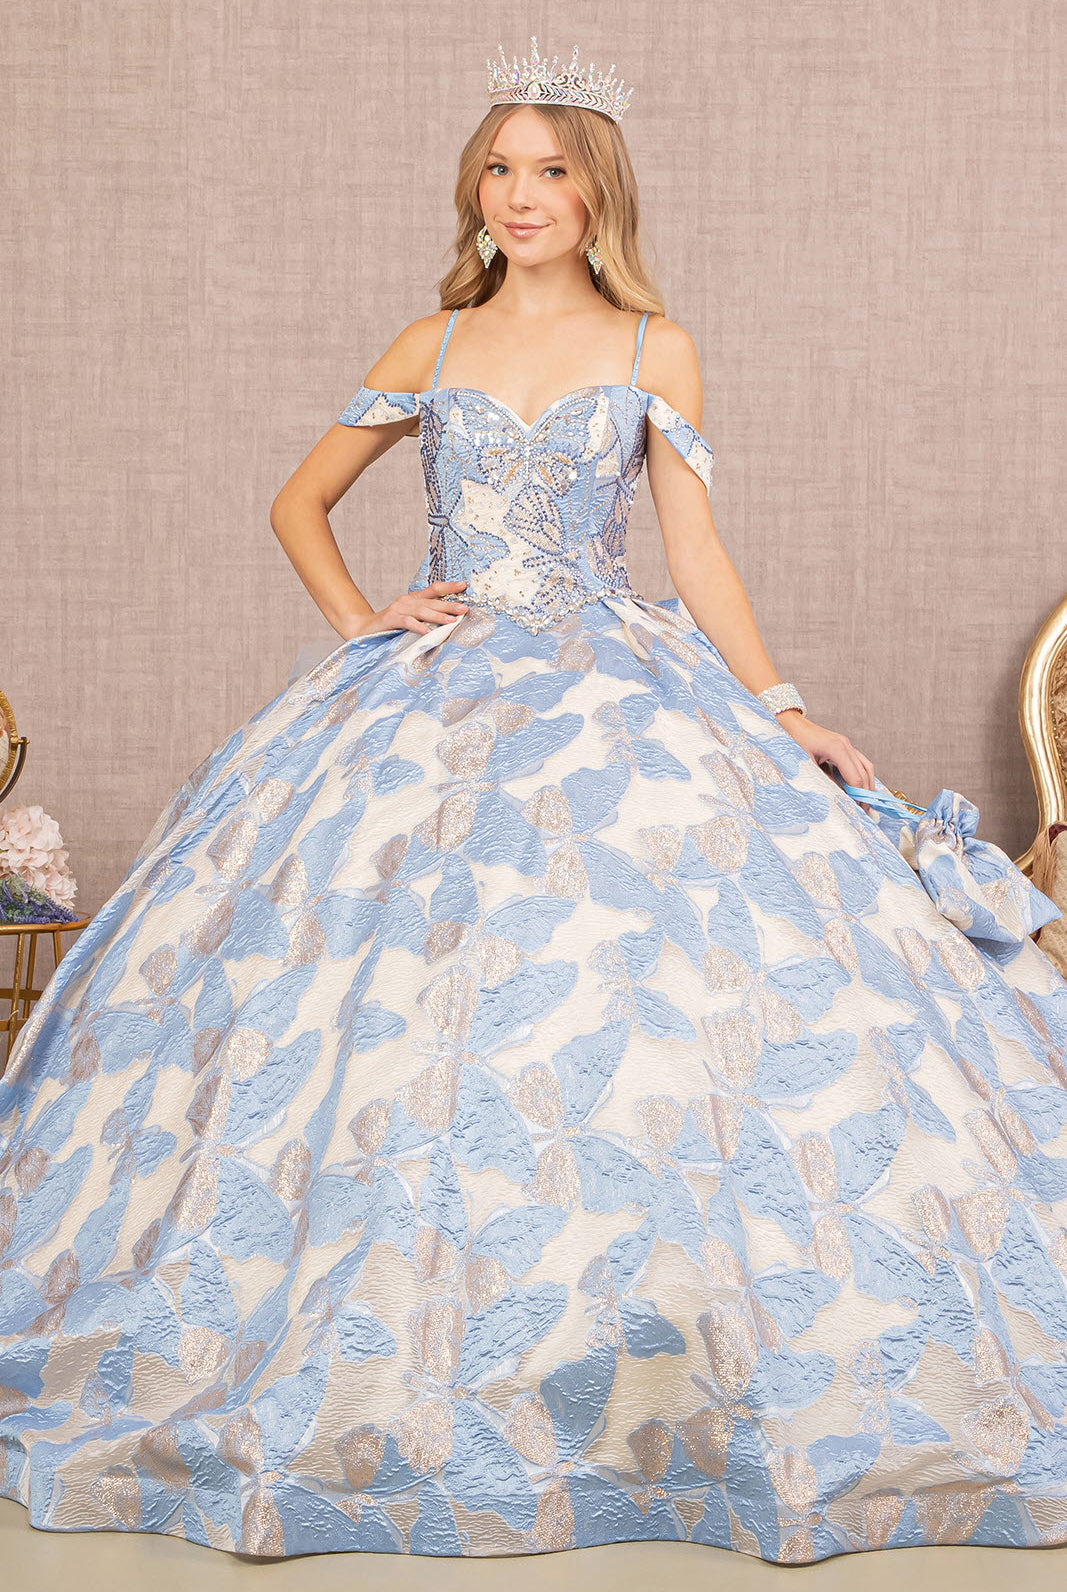 Ribbon Jewel Quinceanera Gown Long Mesh Tail and Mini Bag GLGL3174-QUINCEANERA-smcfashion.com